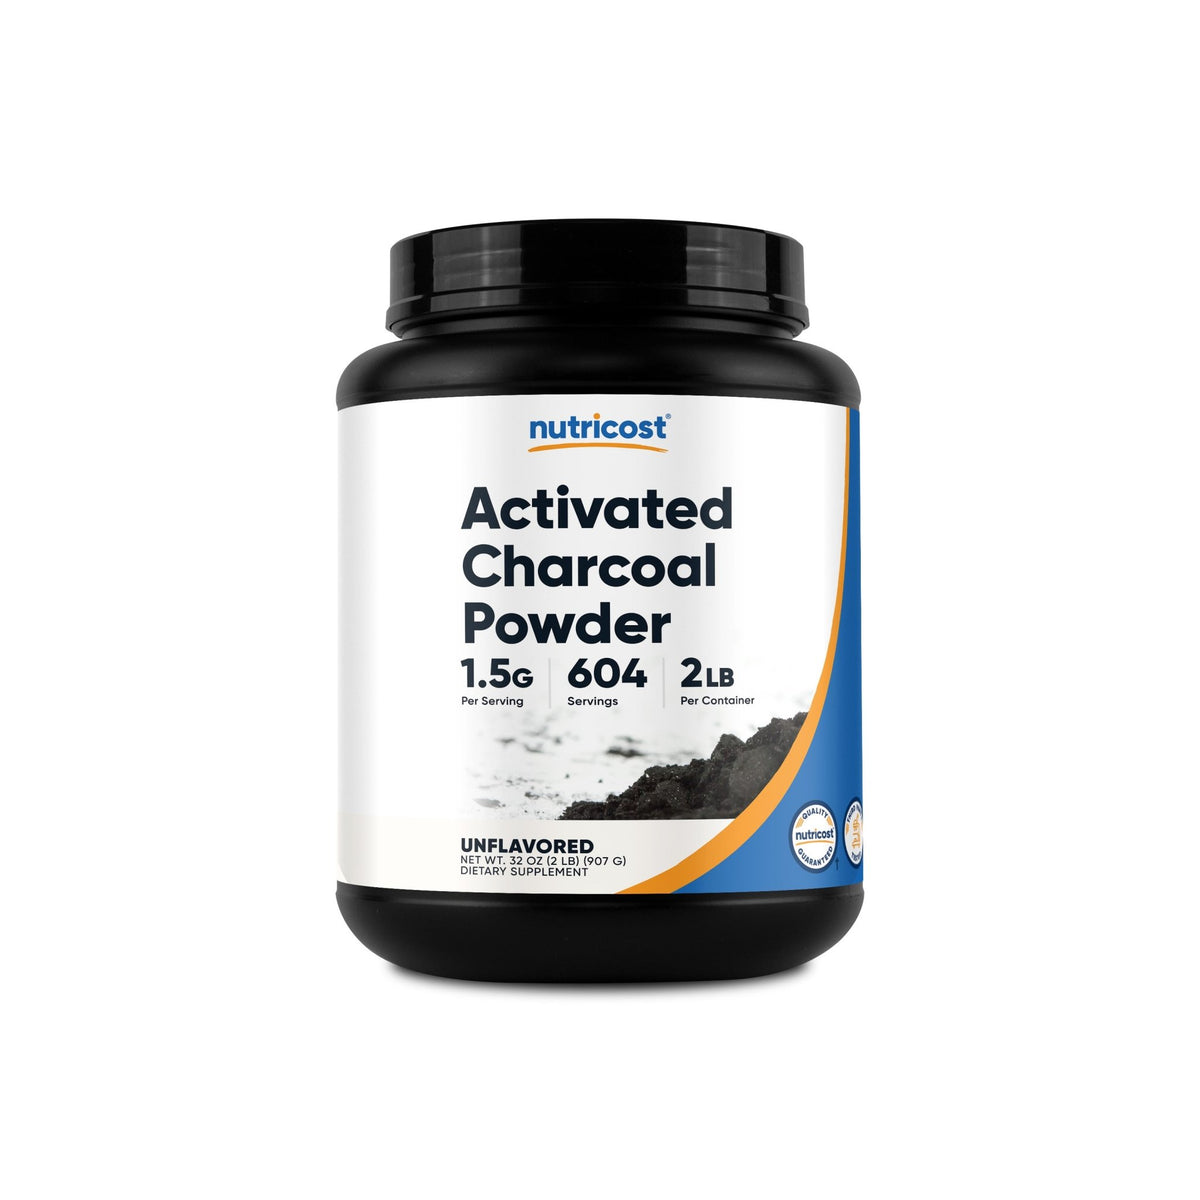 Nutricost Activated Charcoal Powder